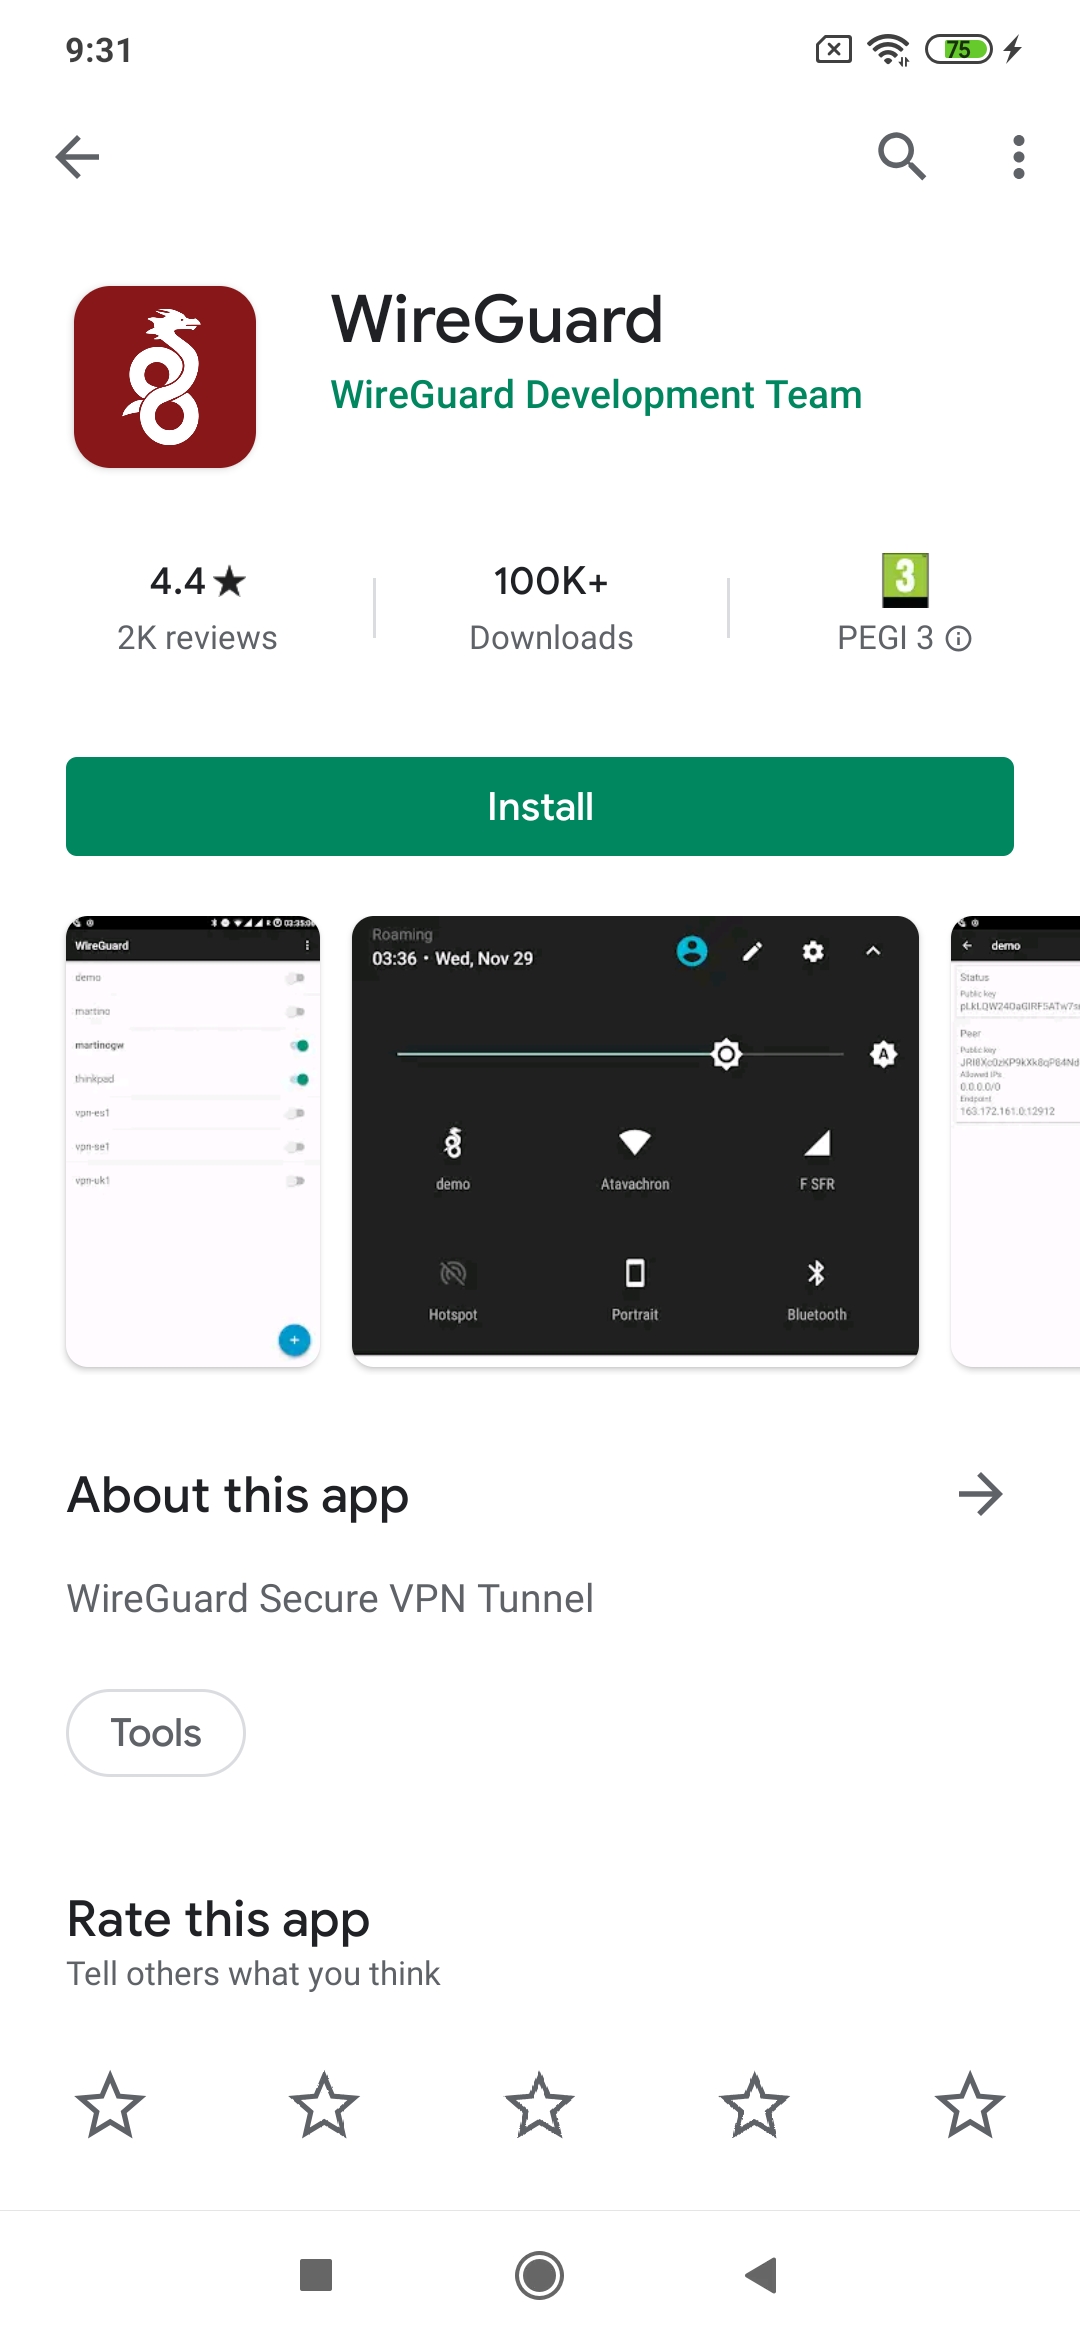 Le VPN Wireguard Android